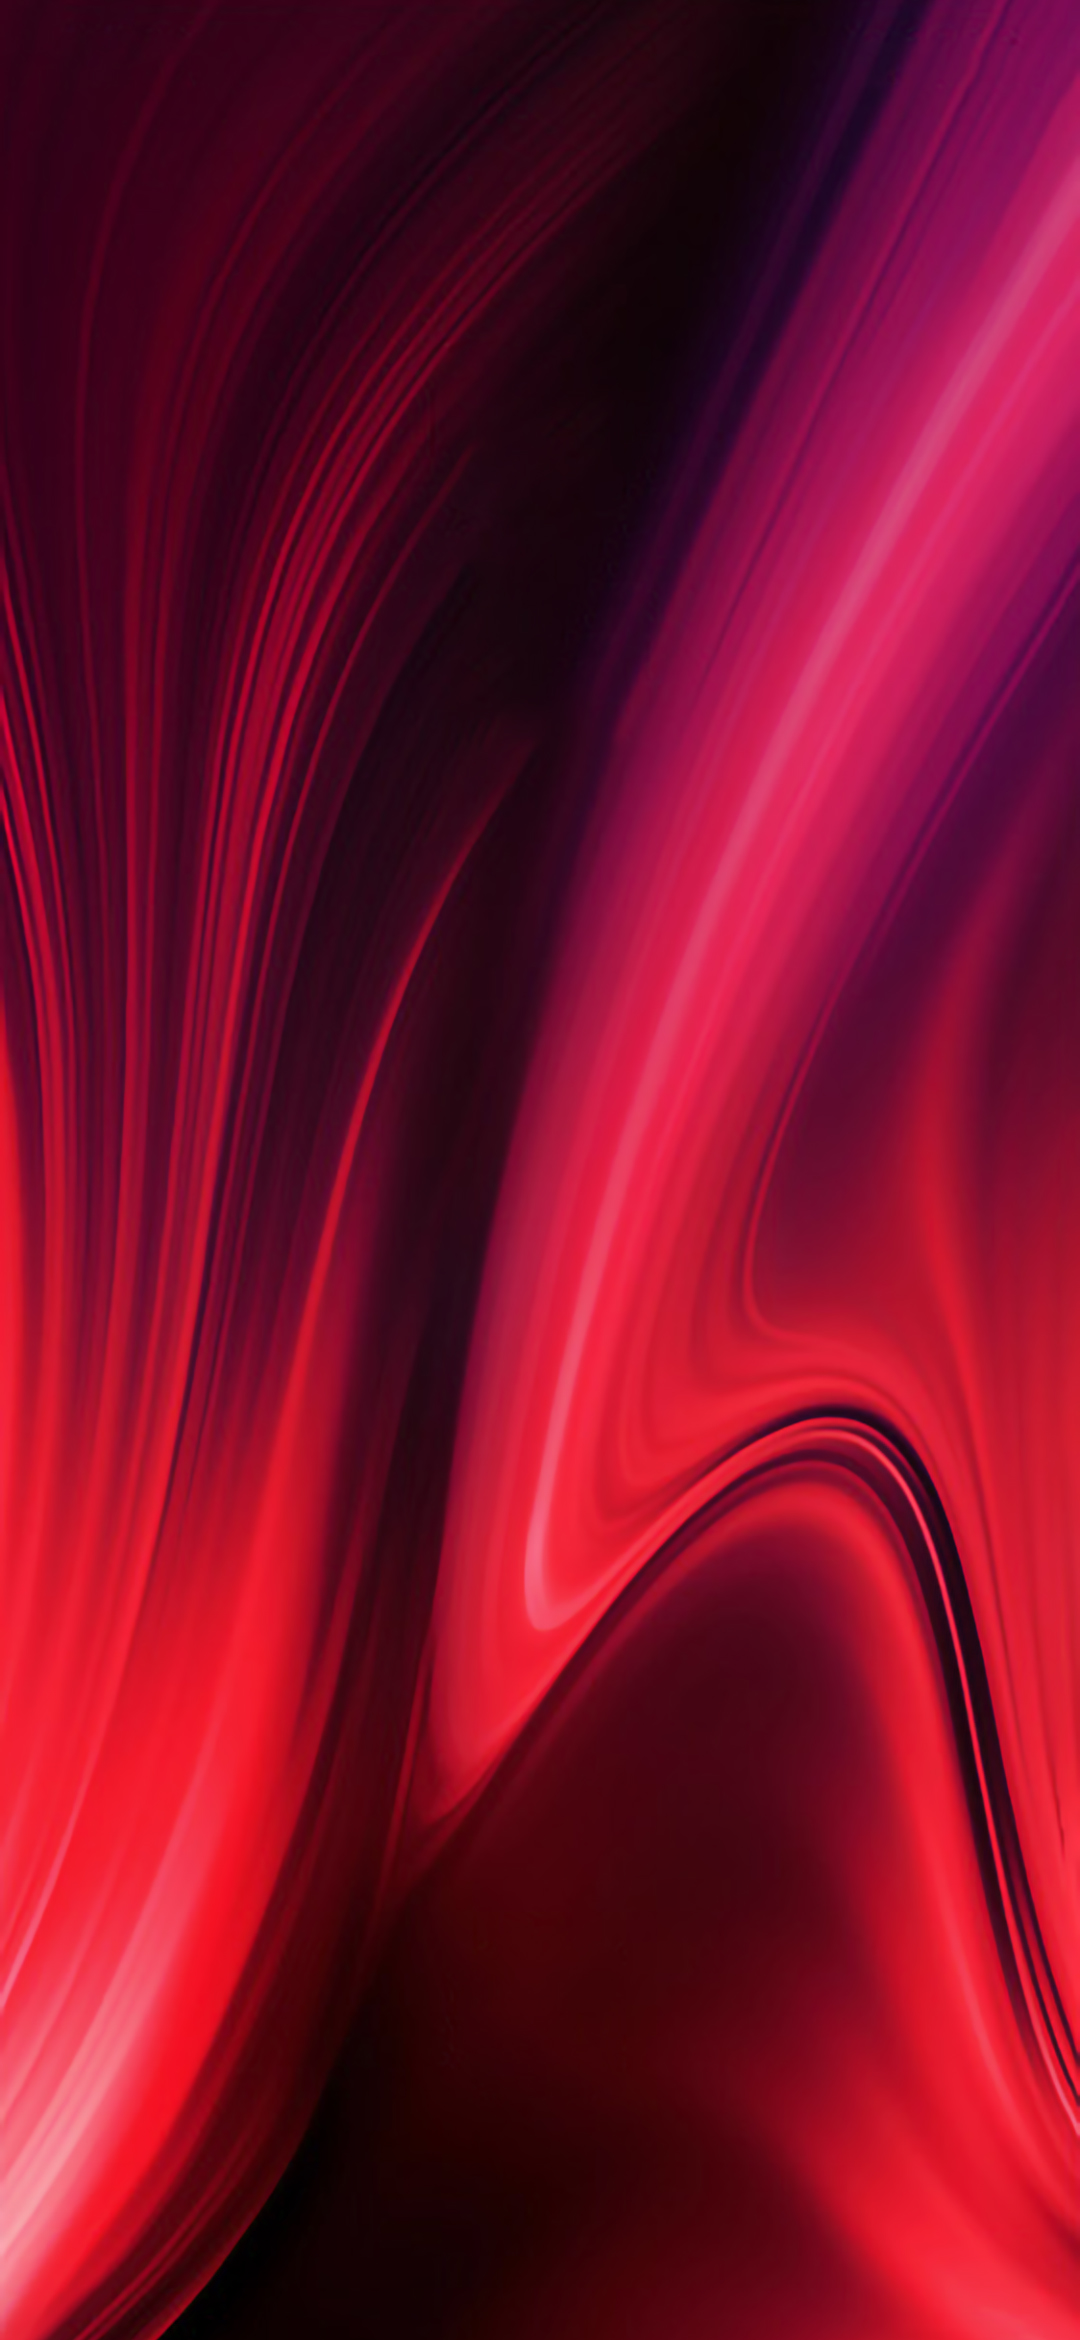 Download Redmi K20 and Redmi K20 Pro Full HD Stock Wallpapers